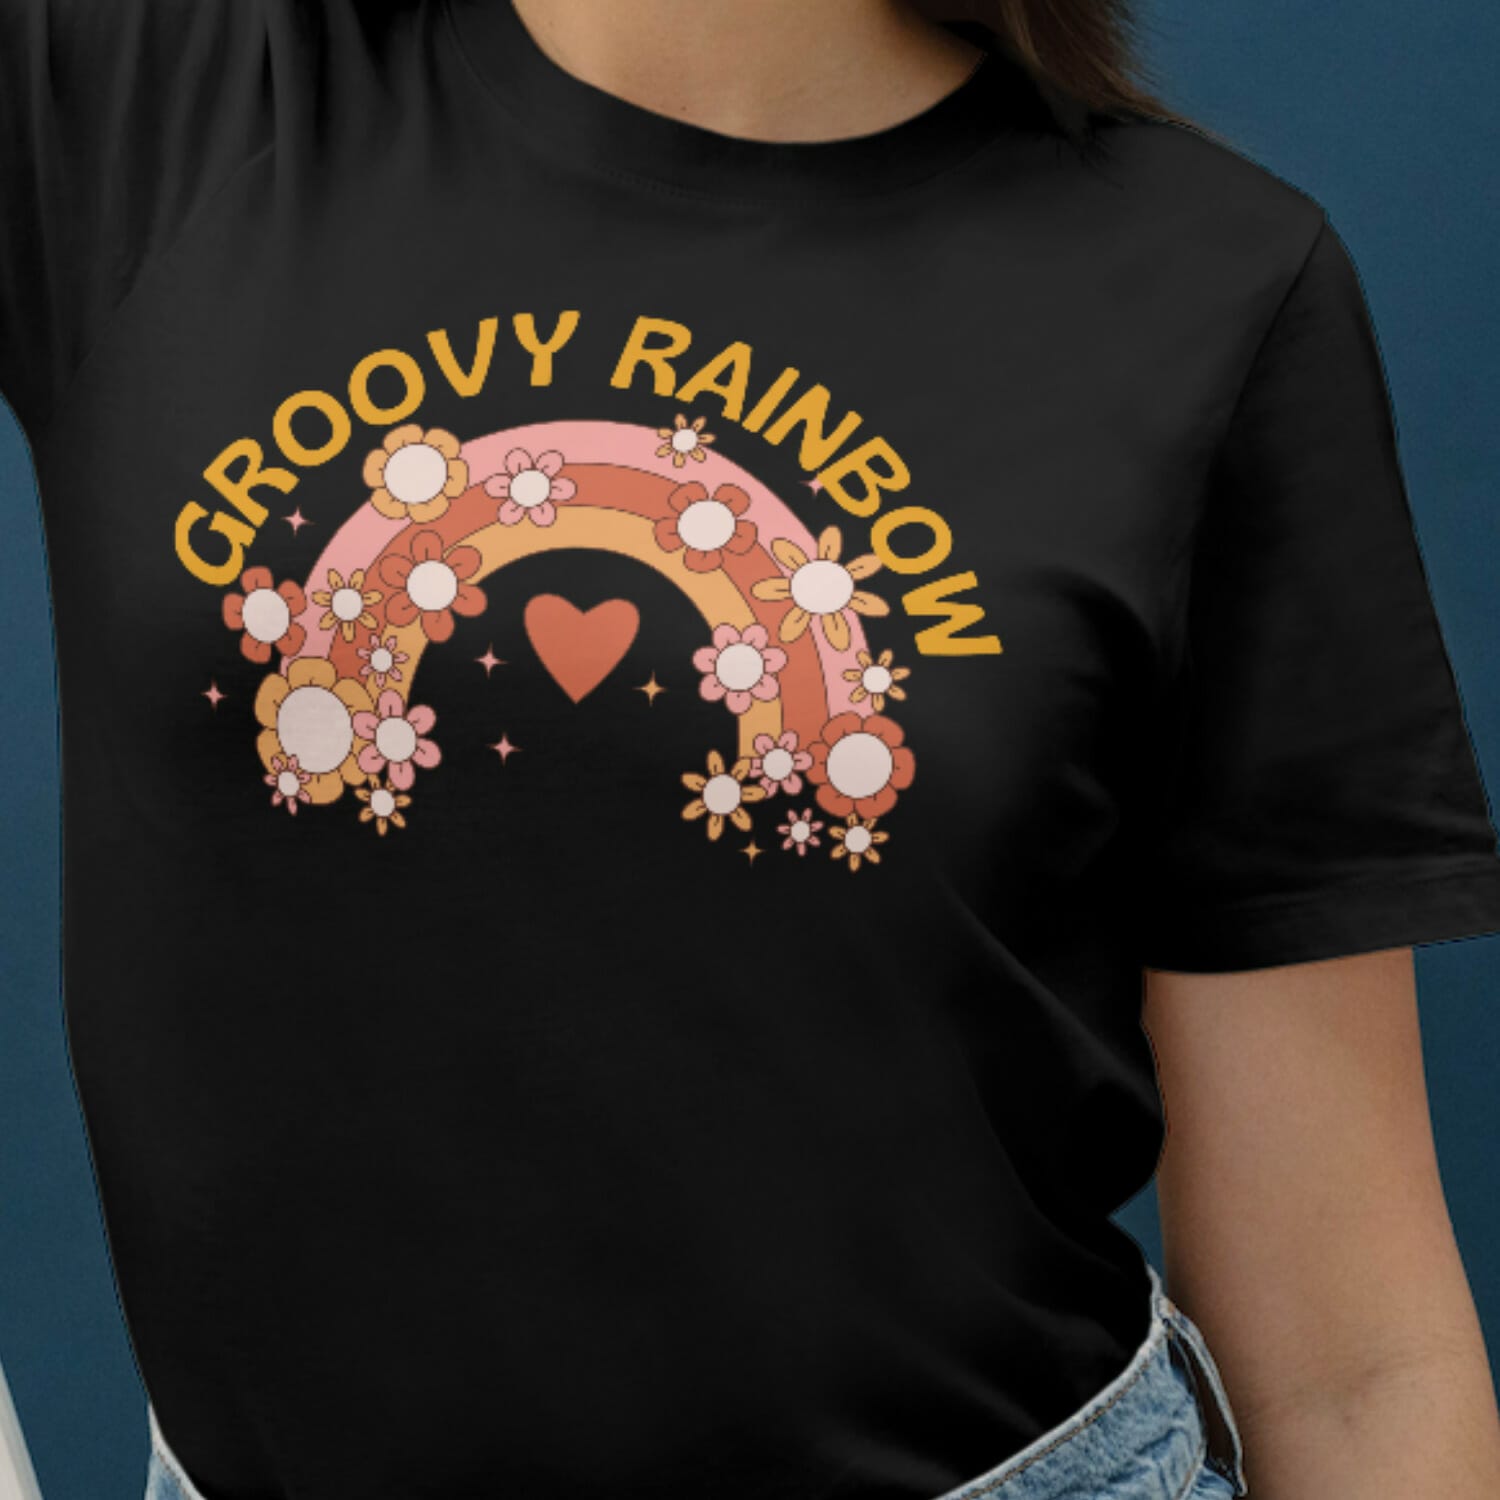 Groovy Rainbow With Heart T Shirt Design For Girls